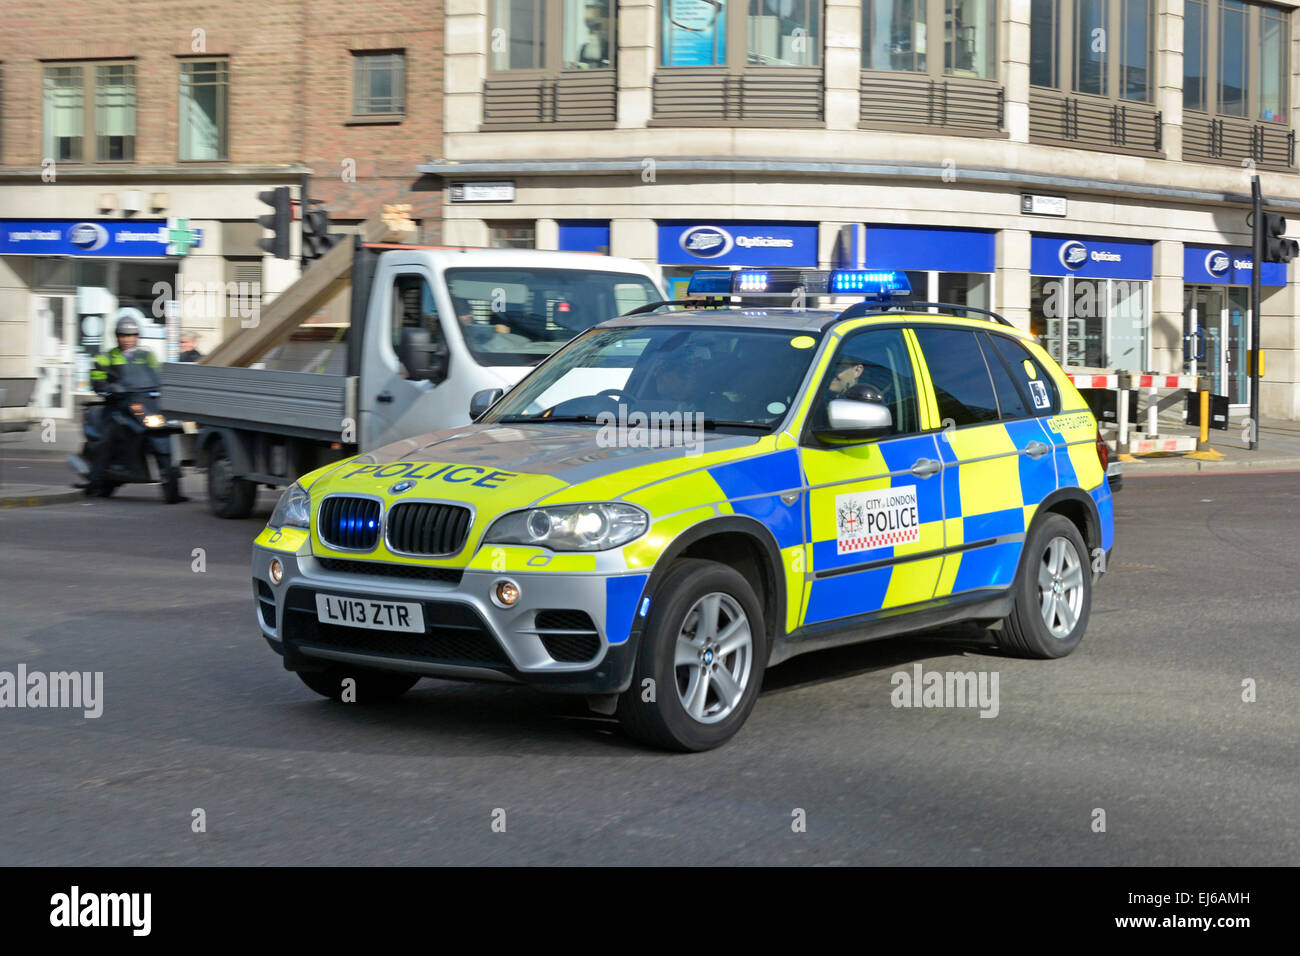 BMW police car crossing road junction responding to an emergency call City of London England UK Stock Photo